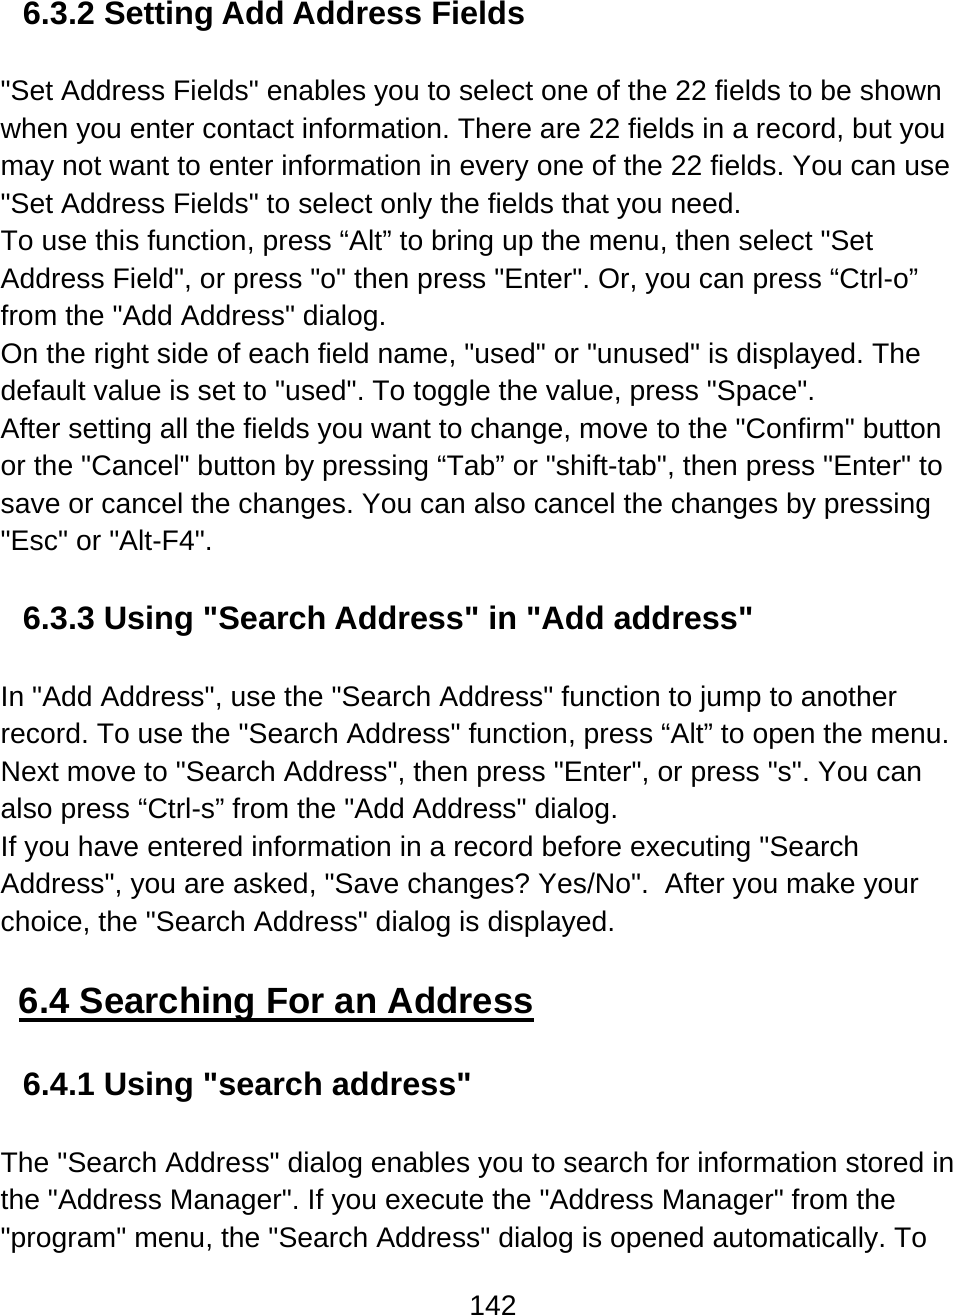 142  6.3.2 Setting Add Address Fields  &quot;Set Address Fields&quot; enables you to select one of the 22 fields to be shown when you enter contact information. There are 22 fields in a record, but you may not want to enter information in every one of the 22 fields. You can use &quot;Set Address Fields&quot; to select only the fields that you need. To use this function, press “Alt” to bring up the menu, then select &quot;Set Address Field&quot;, or press &quot;o&quot; then press &quot;Enter&quot;. Or, you can press “Ctrl-o” from the &quot;Add Address&quot; dialog. On the right side of each field name, &quot;used&quot; or &quot;unused&quot; is displayed. The default value is set to &quot;used&quot;. To toggle the value, press &quot;Space&quot;. After setting all the fields you want to change, move to the &quot;Confirm&quot; button or the &quot;Cancel&quot; button by pressing “Tab” or &quot;shift-tab&quot;, then press &quot;Enter&quot; to save or cancel the changes. You can also cancel the changes by pressing &quot;Esc&quot; or &quot;Alt-F4&quot;.  6.3.3 Using &quot;Search Address&quot; in &quot;Add address&quot;  In &quot;Add Address&quot;, use the &quot;Search Address&quot; function to jump to another record. To use the &quot;Search Address&quot; function, press “Alt” to open the menu. Next move to &quot;Search Address&quot;, then press &quot;Enter&quot;, or press &quot;s&quot;. You can also press “Ctrl-s” from the &quot;Add Address&quot; dialog. If you have entered information in a record before executing &quot;Search Address&quot;, you are asked, &quot;Save changes? Yes/No&quot;.  After you make your choice, the &quot;Search Address&quot; dialog is displayed.  6.4 Searching For an Address  6.4.1 Using &quot;search address&quot;  The &quot;Search Address&quot; dialog enables you to search for information stored in the &quot;Address Manager&quot;. If you execute the &quot;Address Manager&quot; from the &quot;program&quot; menu, the &quot;Search Address&quot; dialog is opened automatically. To 